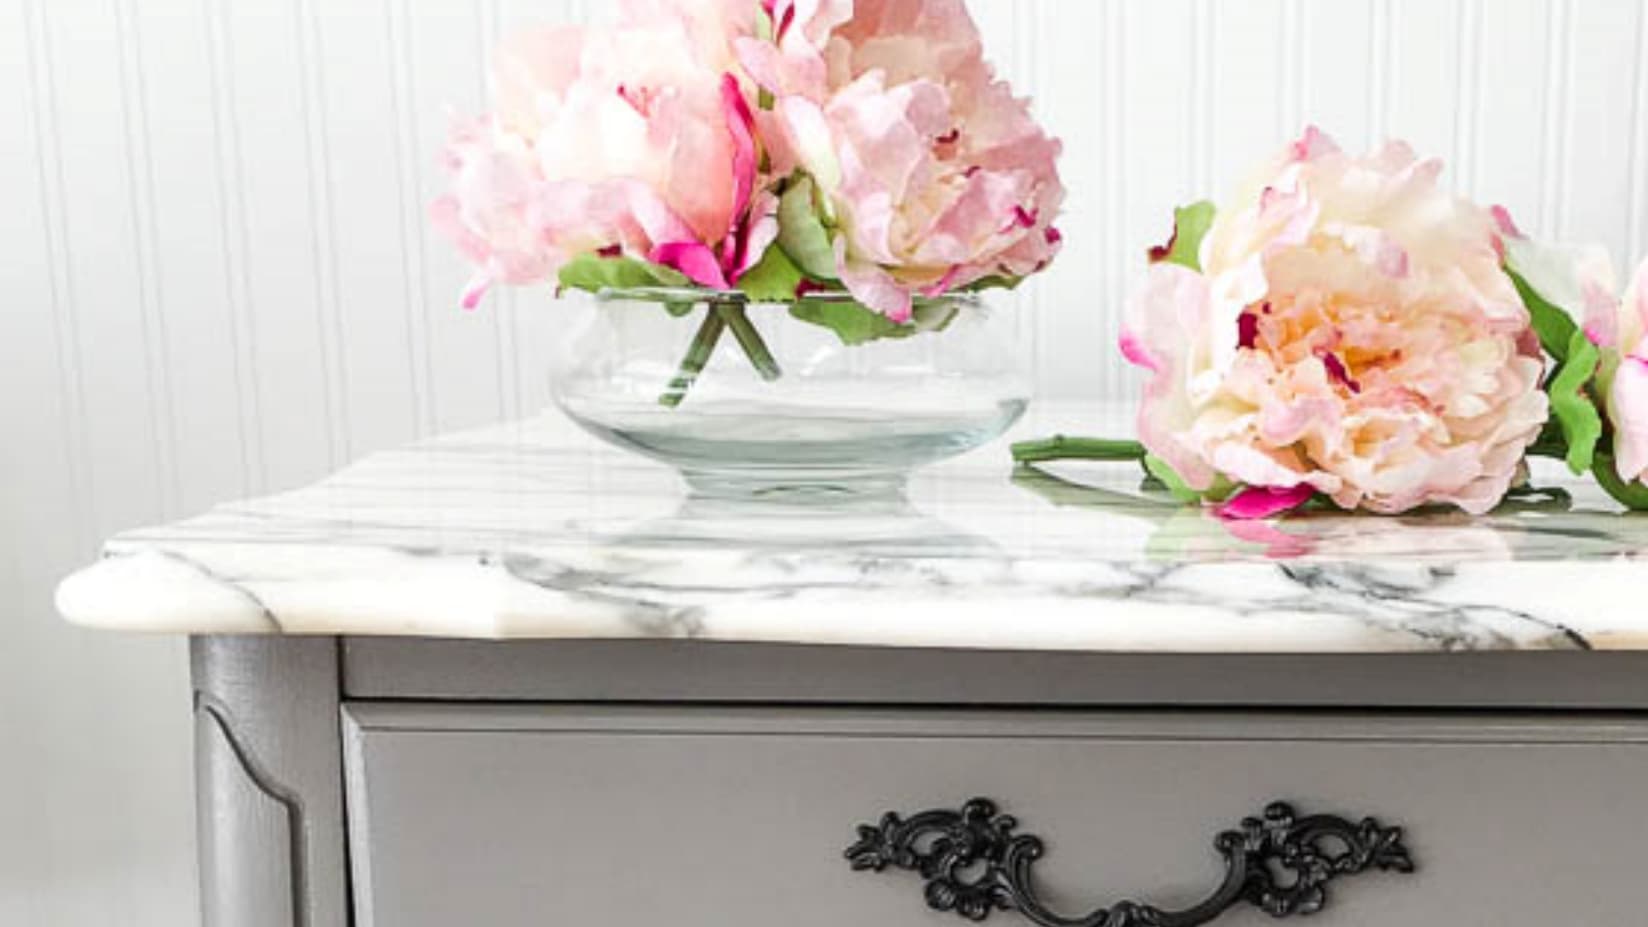 20 Milk Paint Furniture Before and After Makeovers - Lost & Found Decor